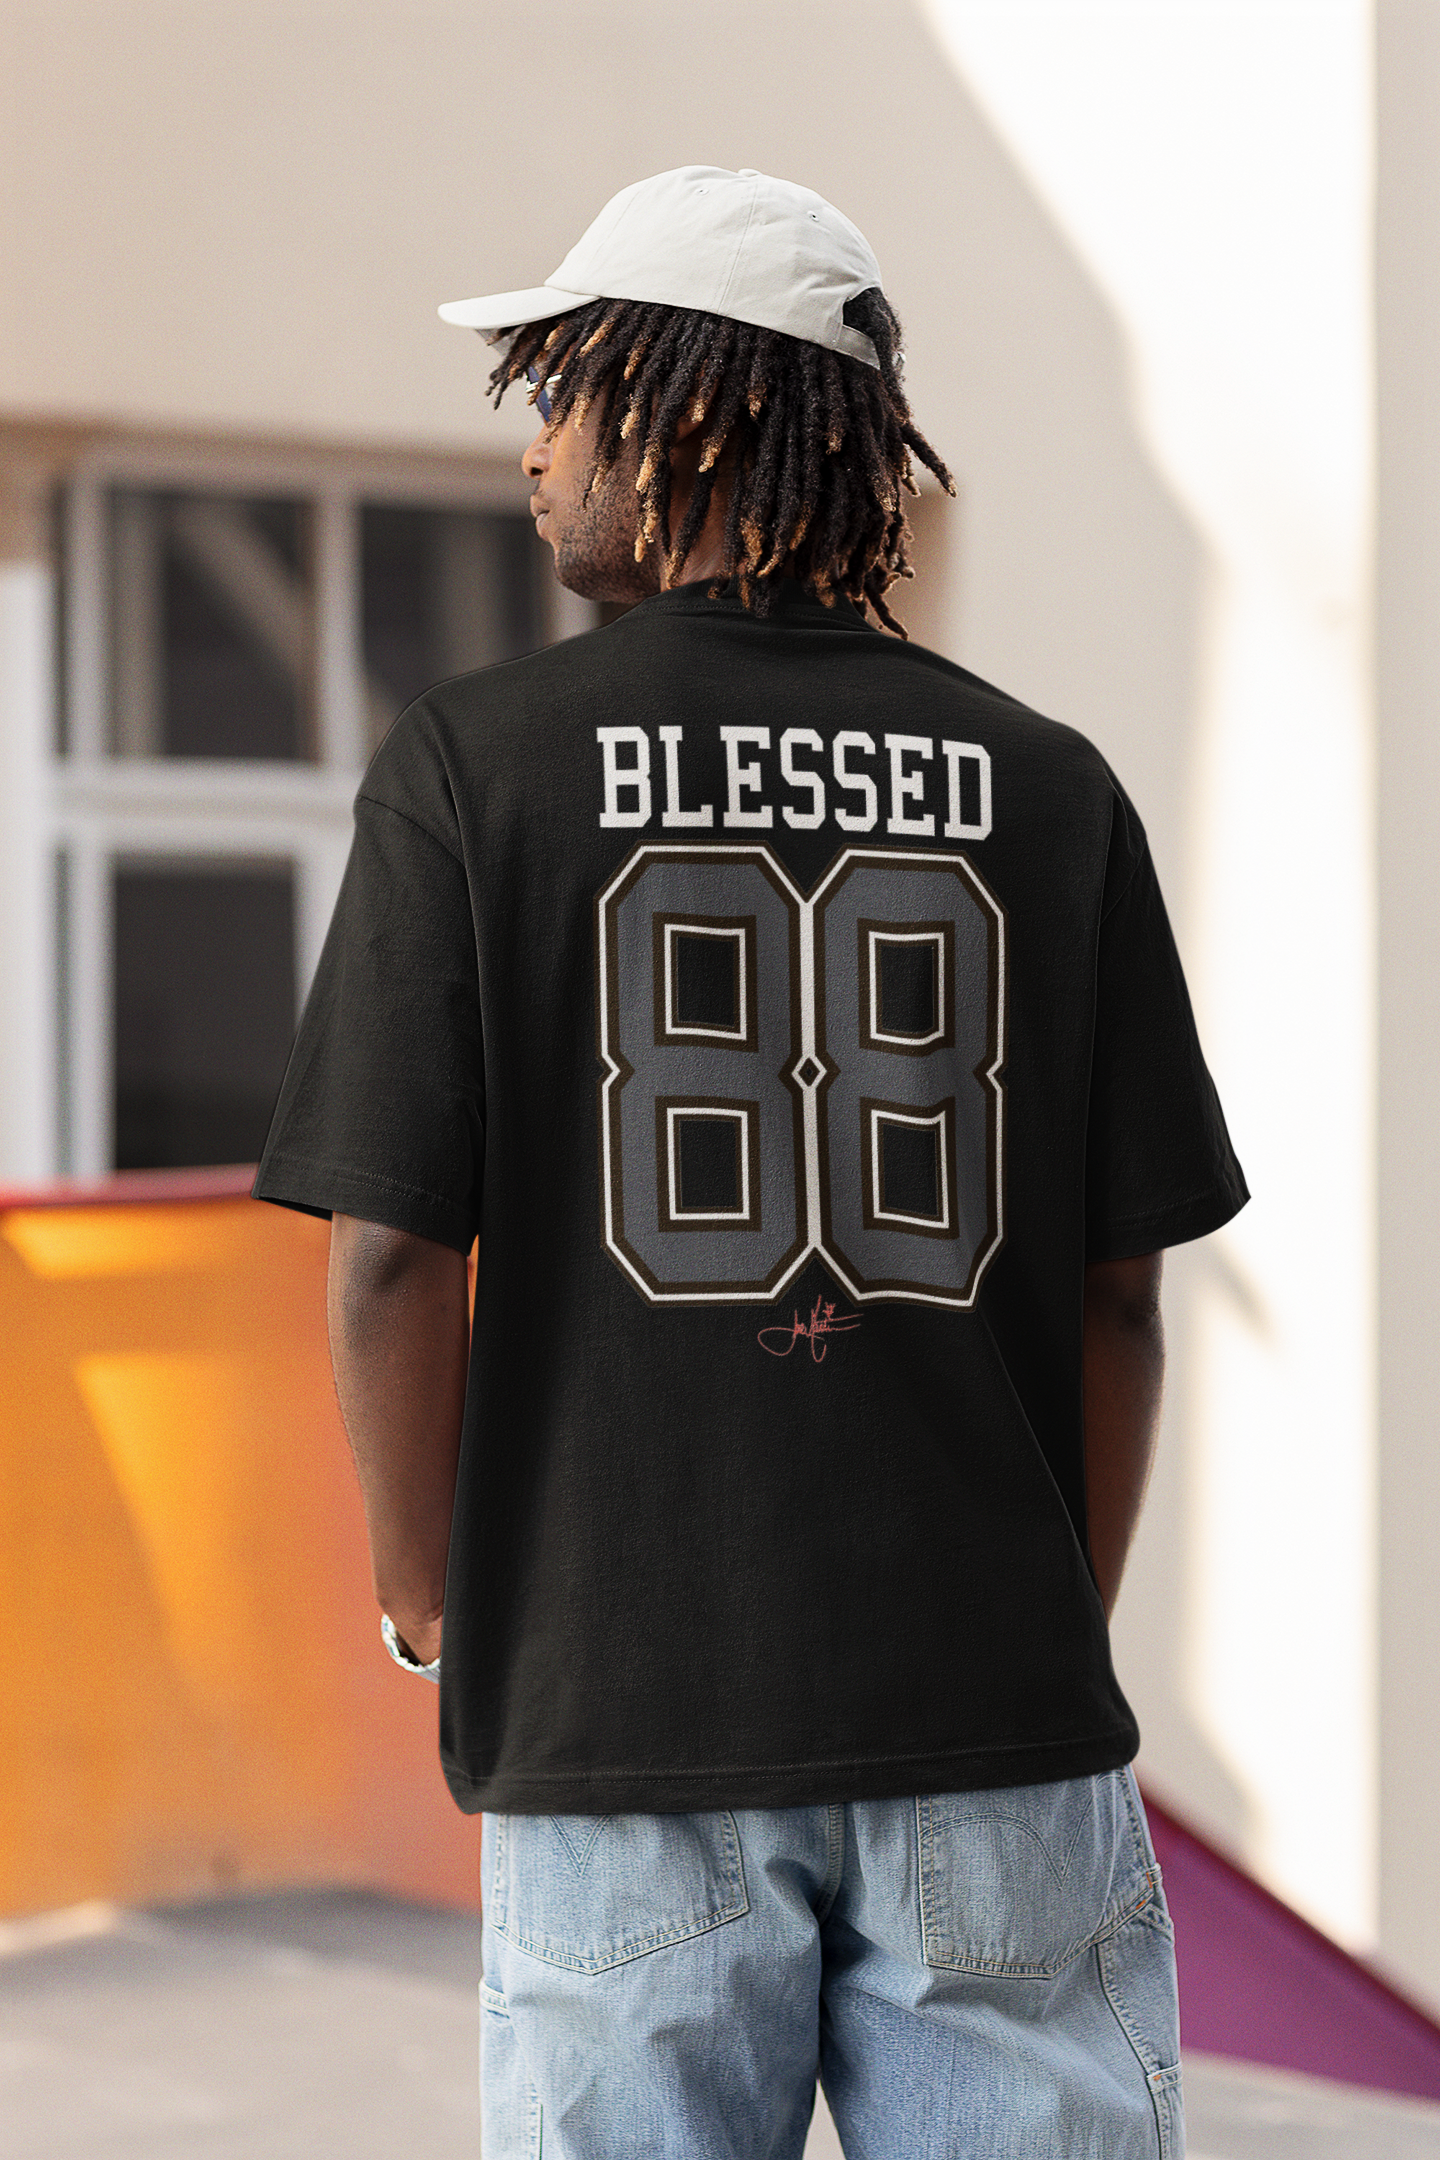 88 Blessed Tee